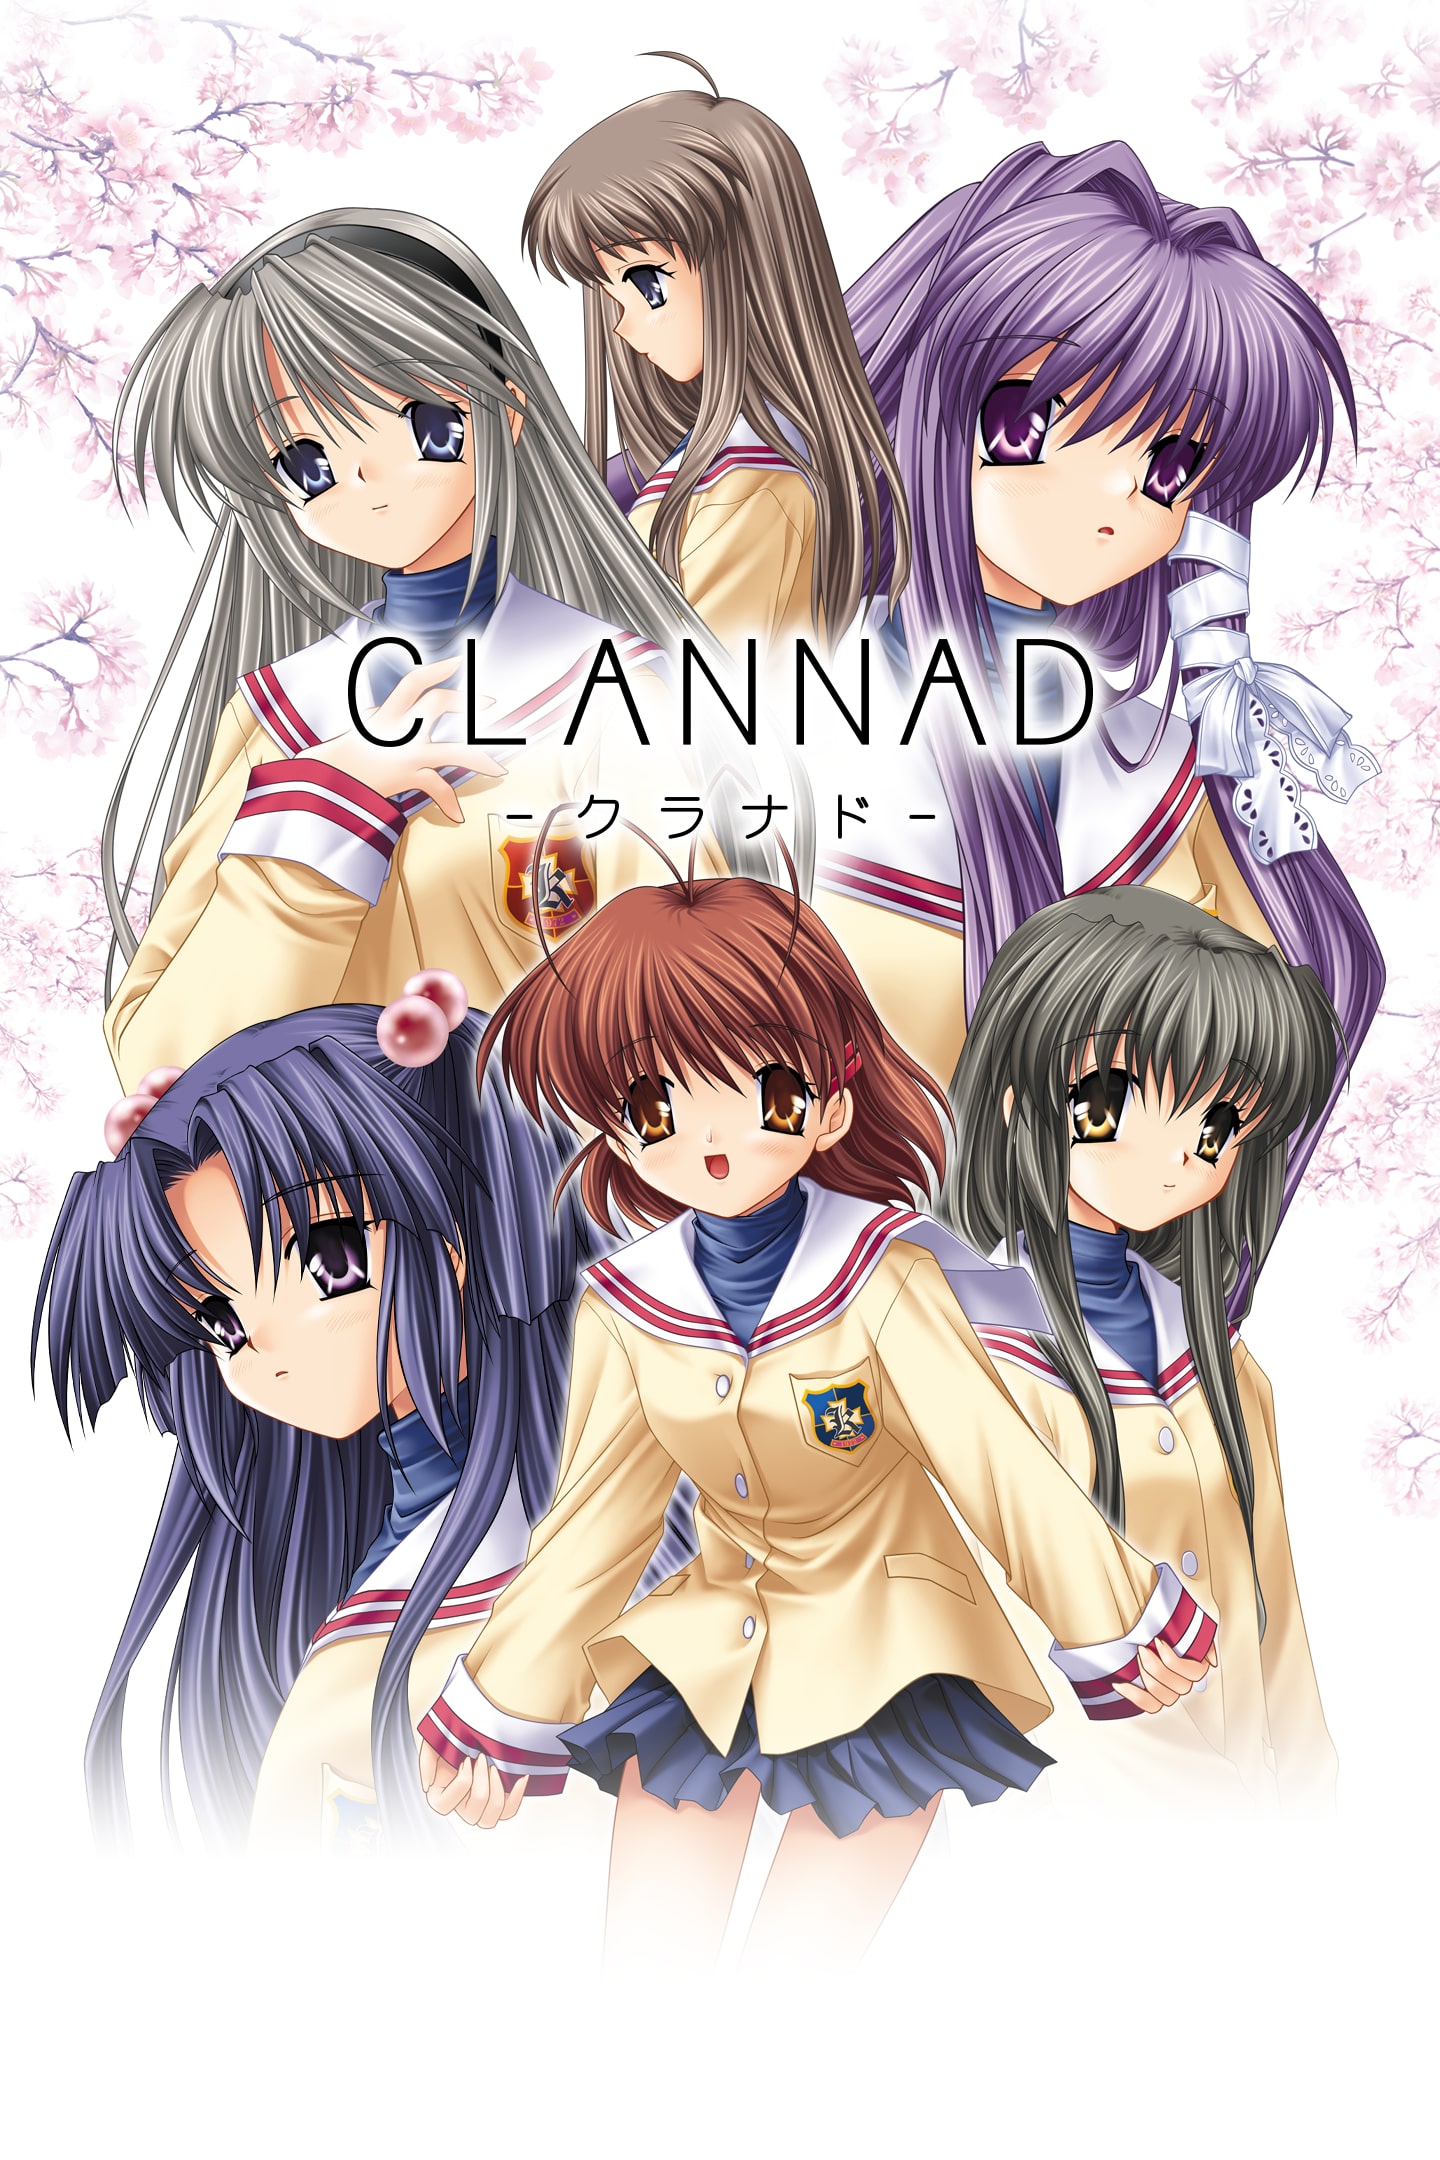 Amazon.com: Superior Posters Clannad Poster Story Anime Aftet Japanese Cute  Wall Art Nagisa 16x20 Inches: Posters & Prints